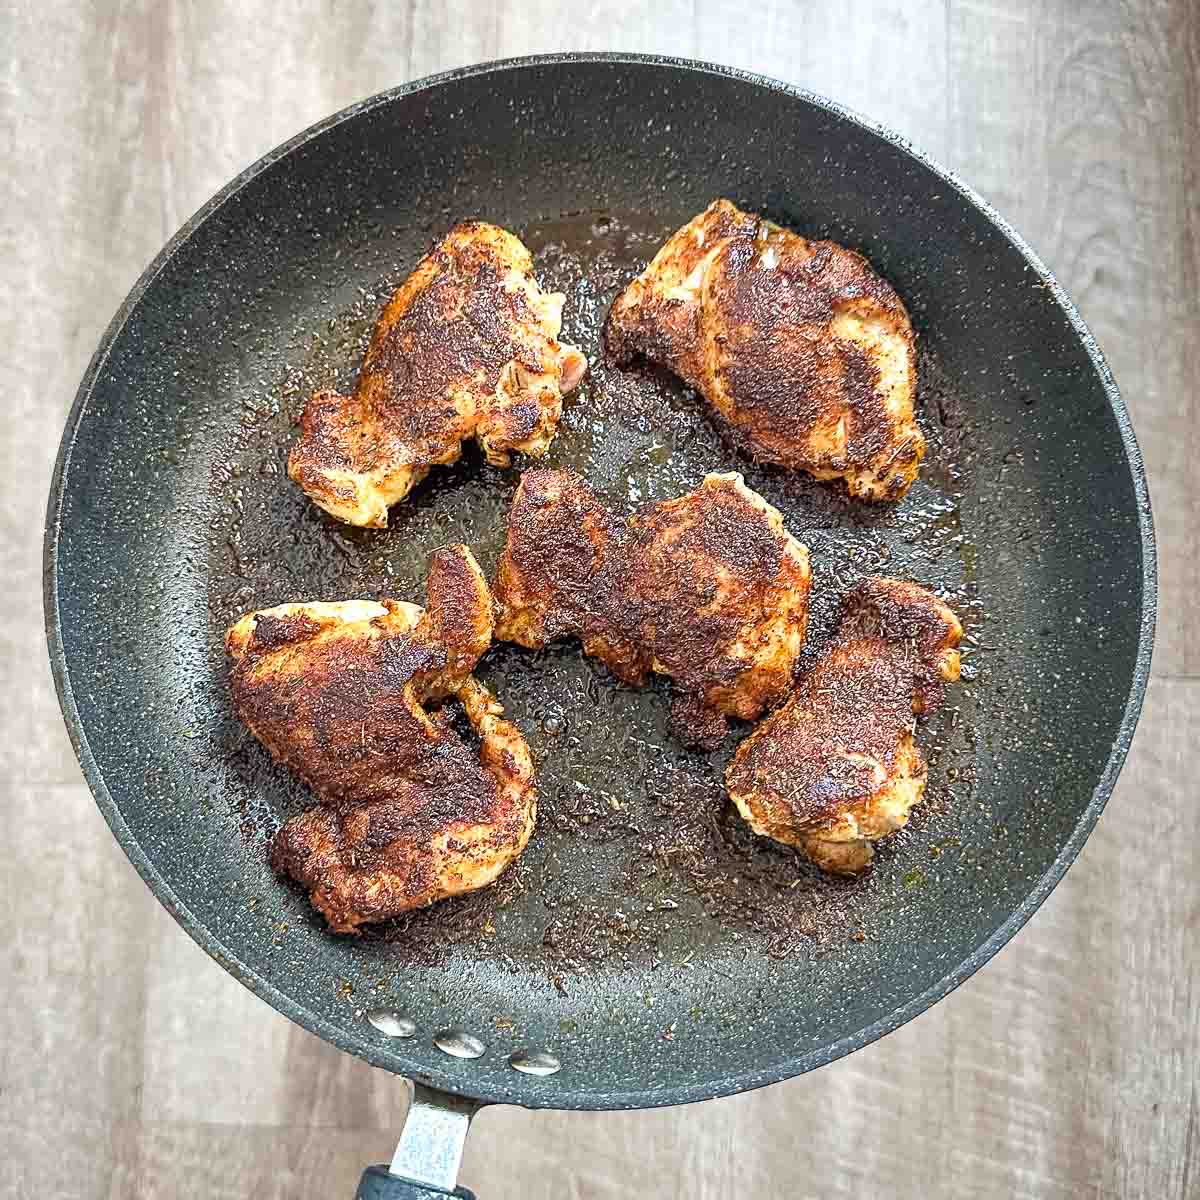 A frying pan with cooked blackened chicken thighs in it.